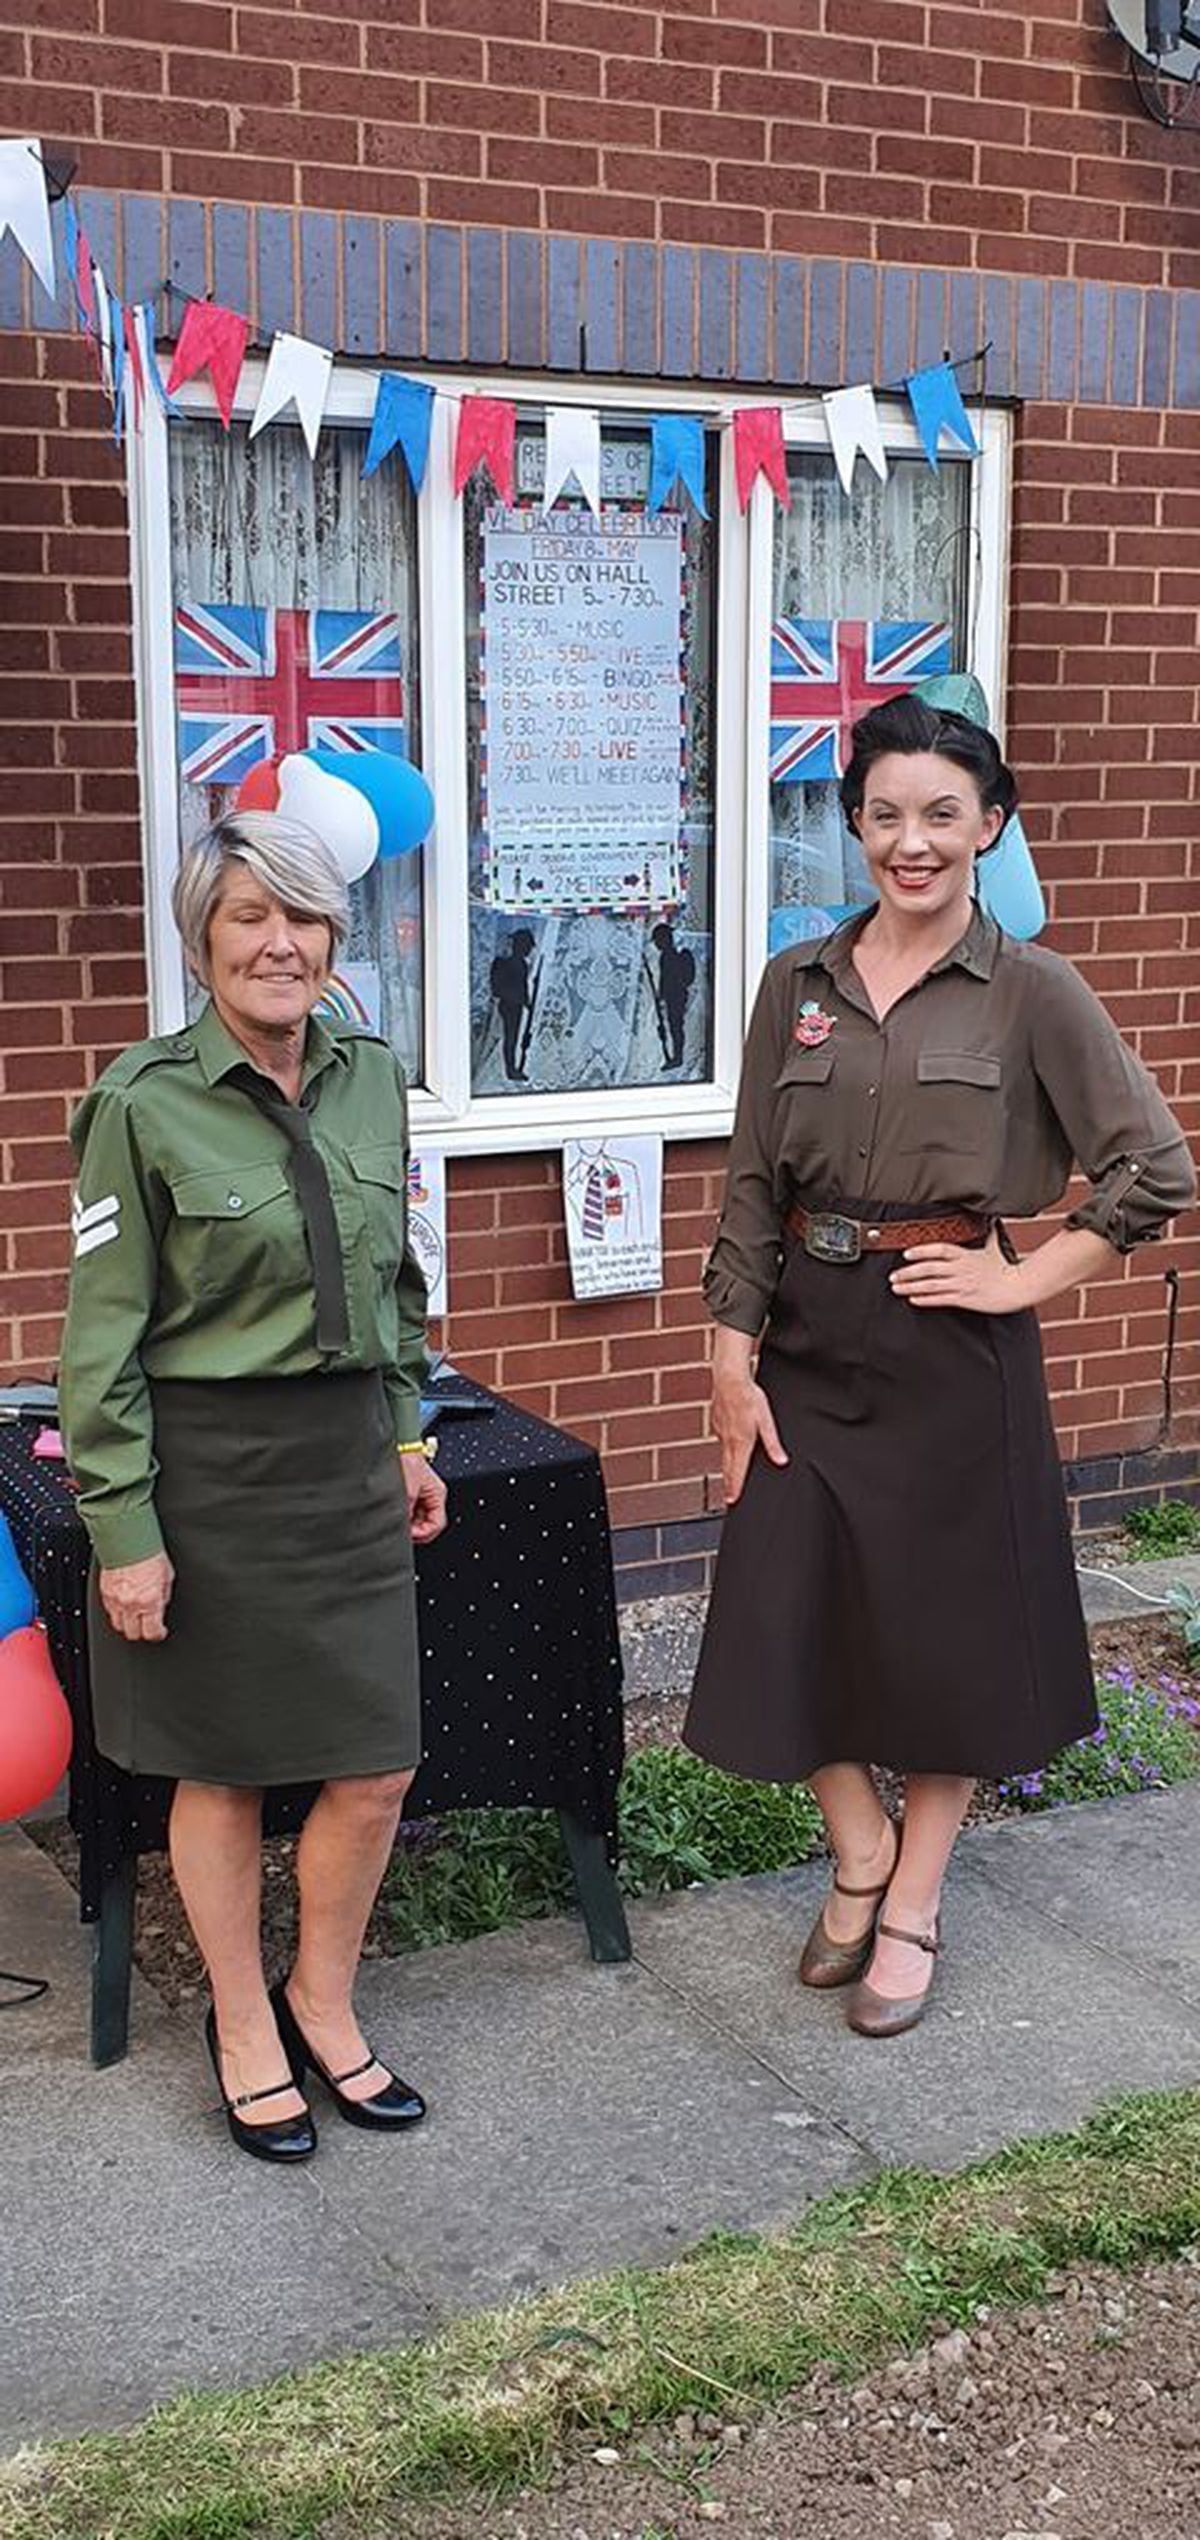 VE Day celebrations in Hall St, Cradley Heath